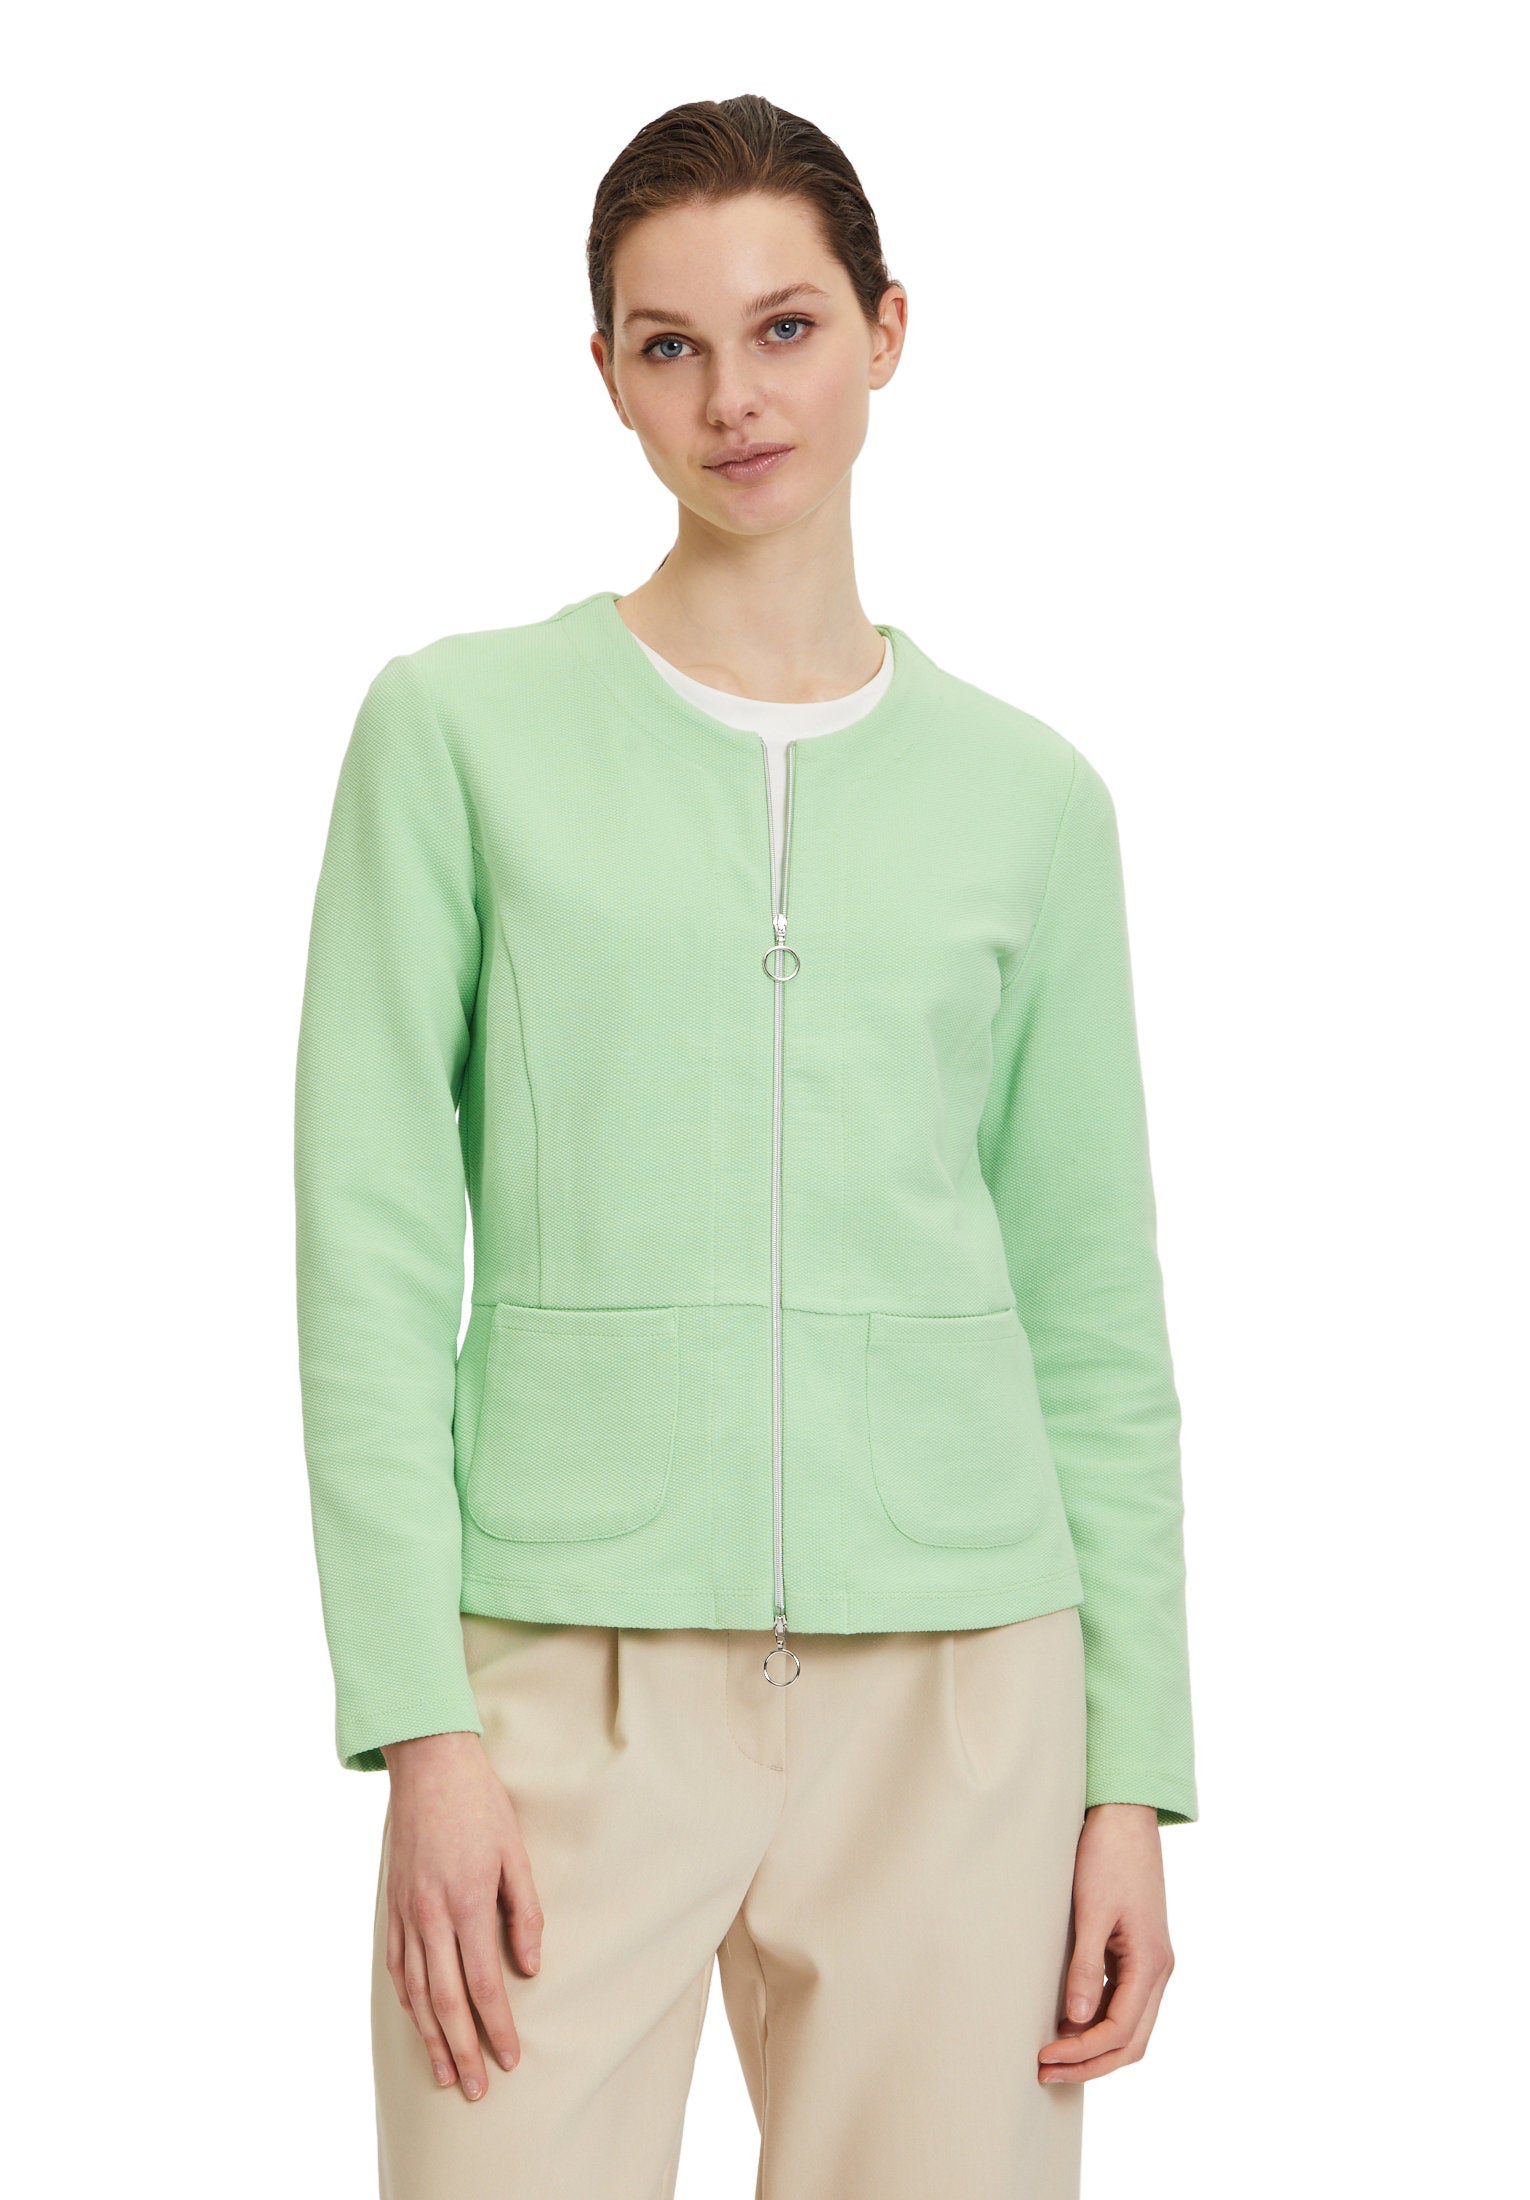 Pastel Green Fitted Blazer Style Cardigan_4340 1050_5242_03